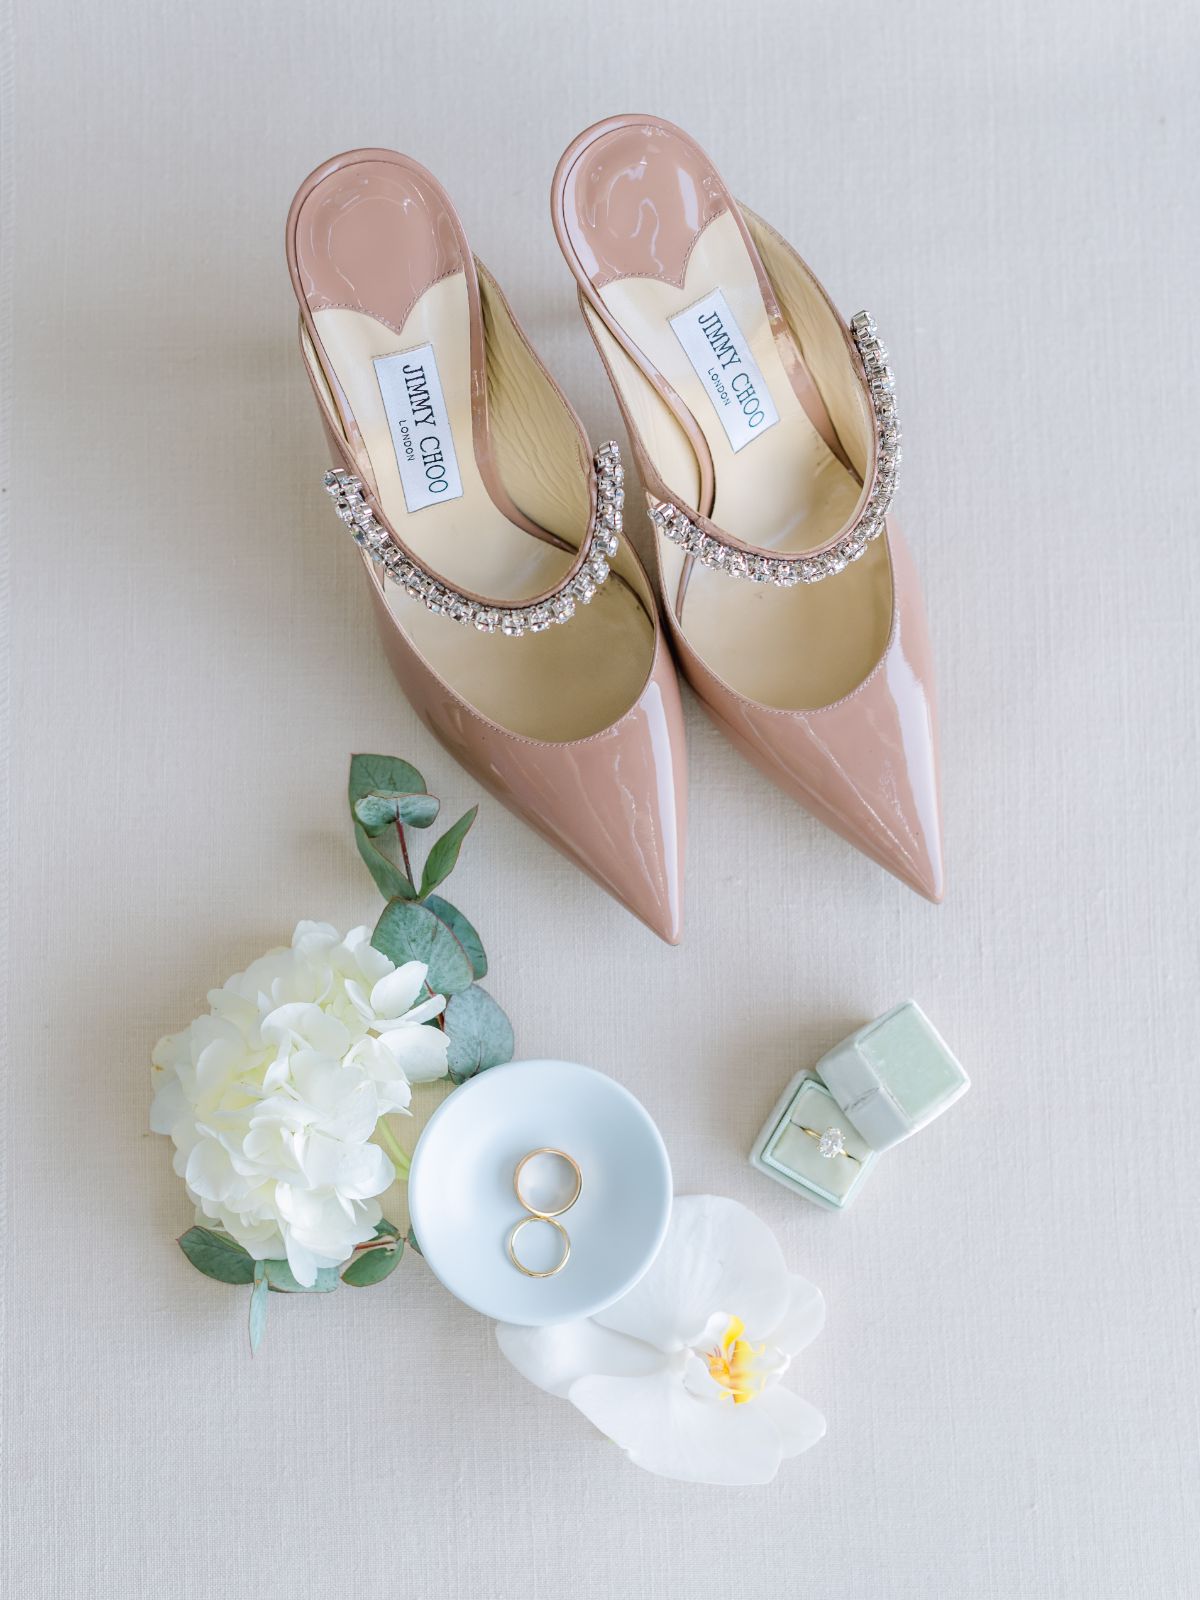 The Best Bridal Shoes, from Manolo Blahnik to Jimmy Choo, Stories